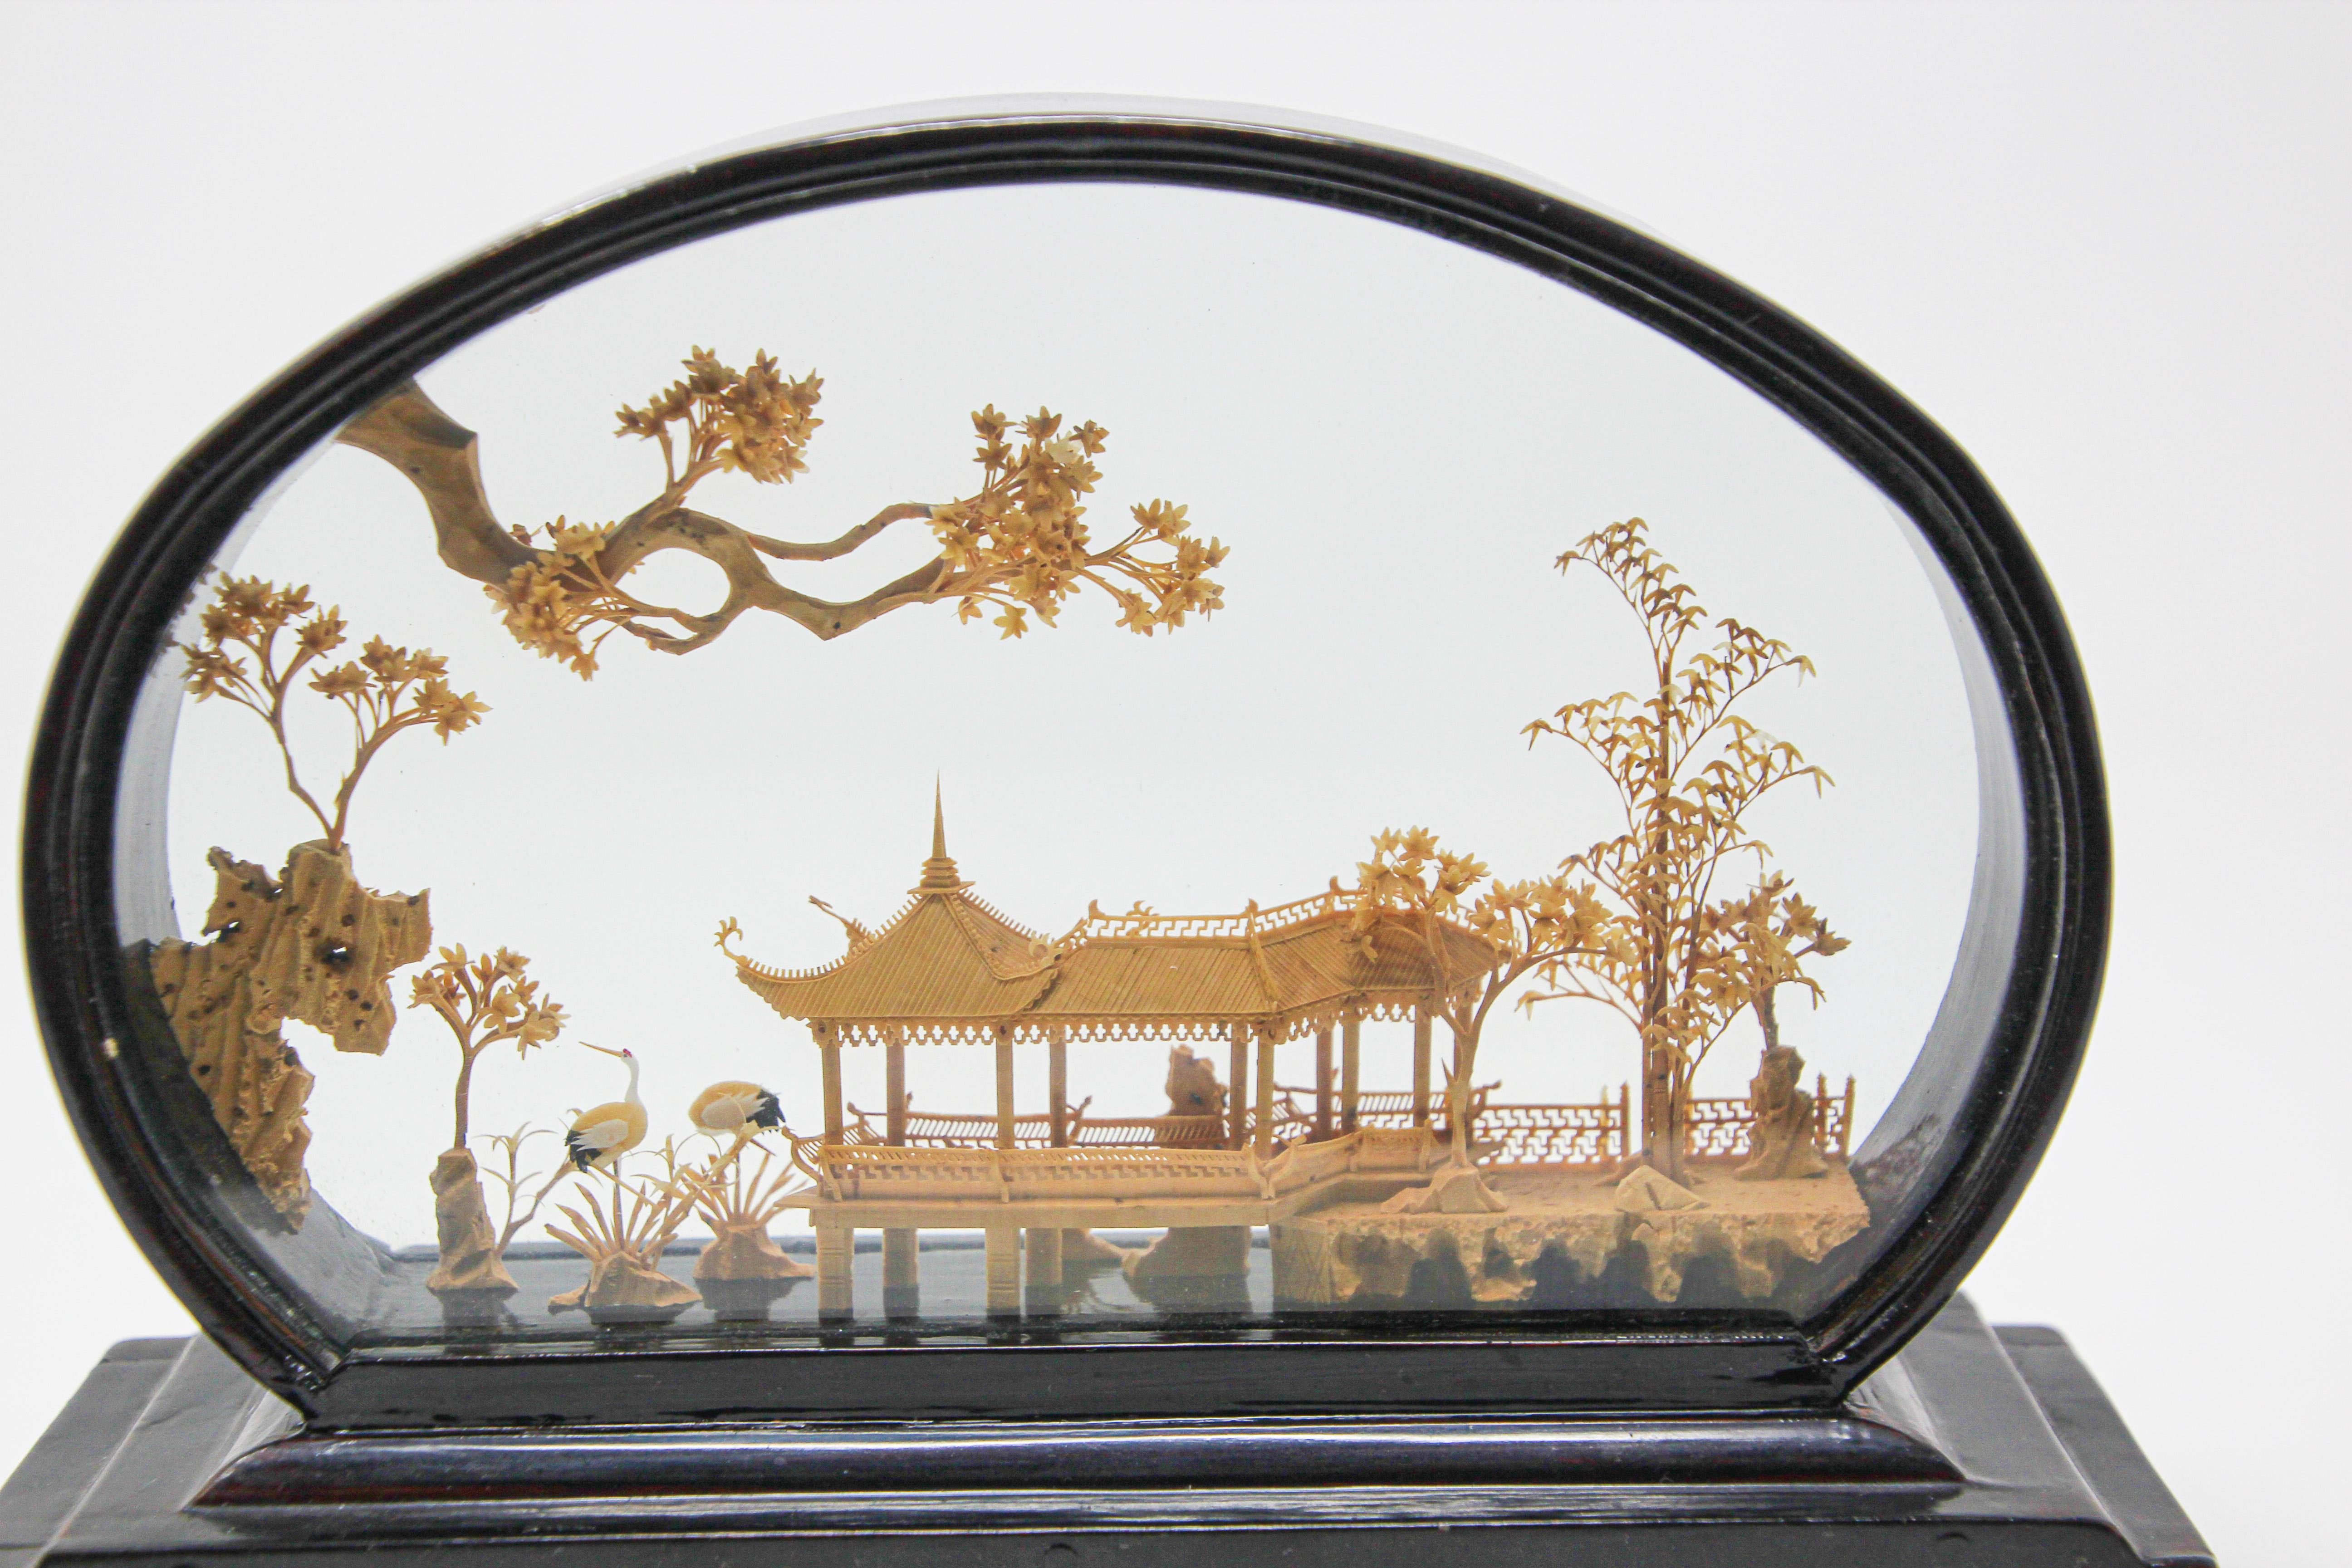 Vintage 1940s Chinese San You Diorama hand carved cork miniature architectural scene in glass case lacquered wood box.
San you are renowned for its carved cork dioramas.
Made in China, this gorgeous piece features a miniature architectural scene